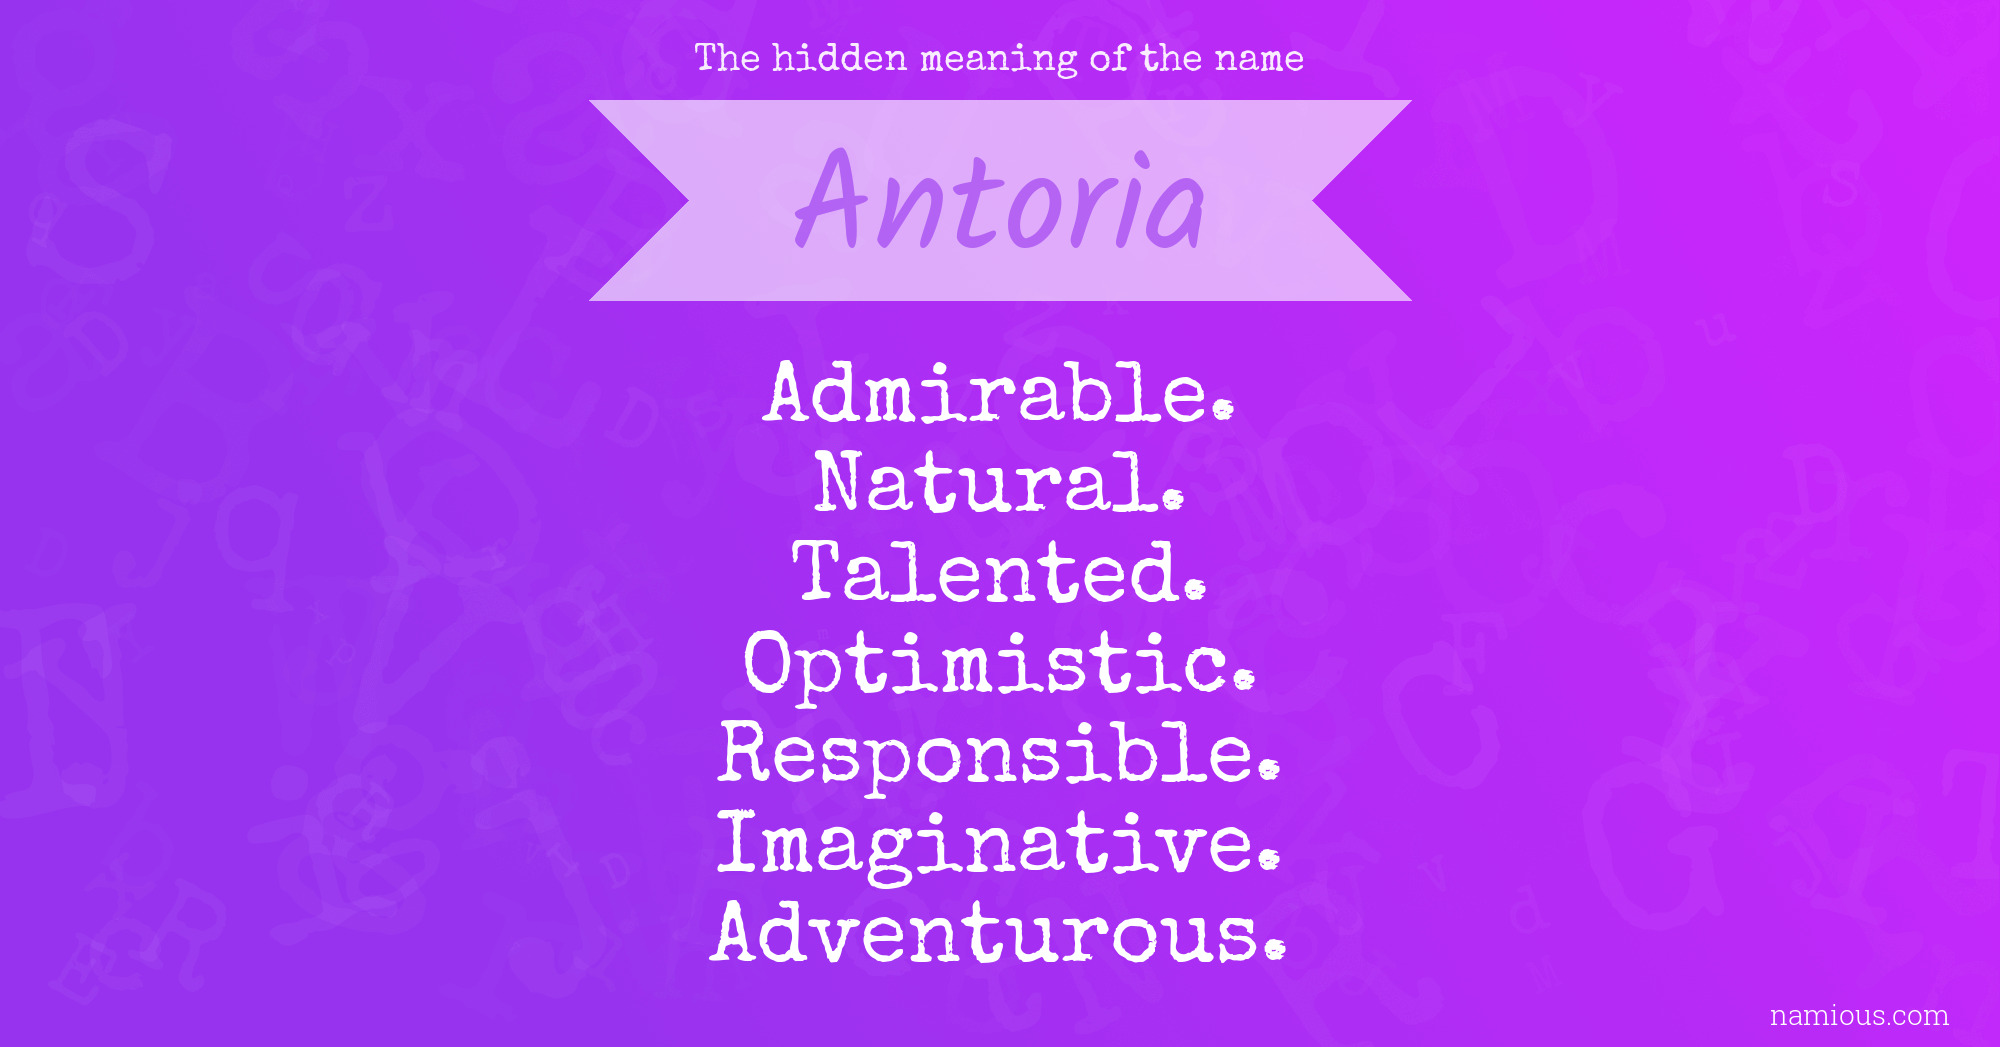 The hidden meaning of the name Antoria